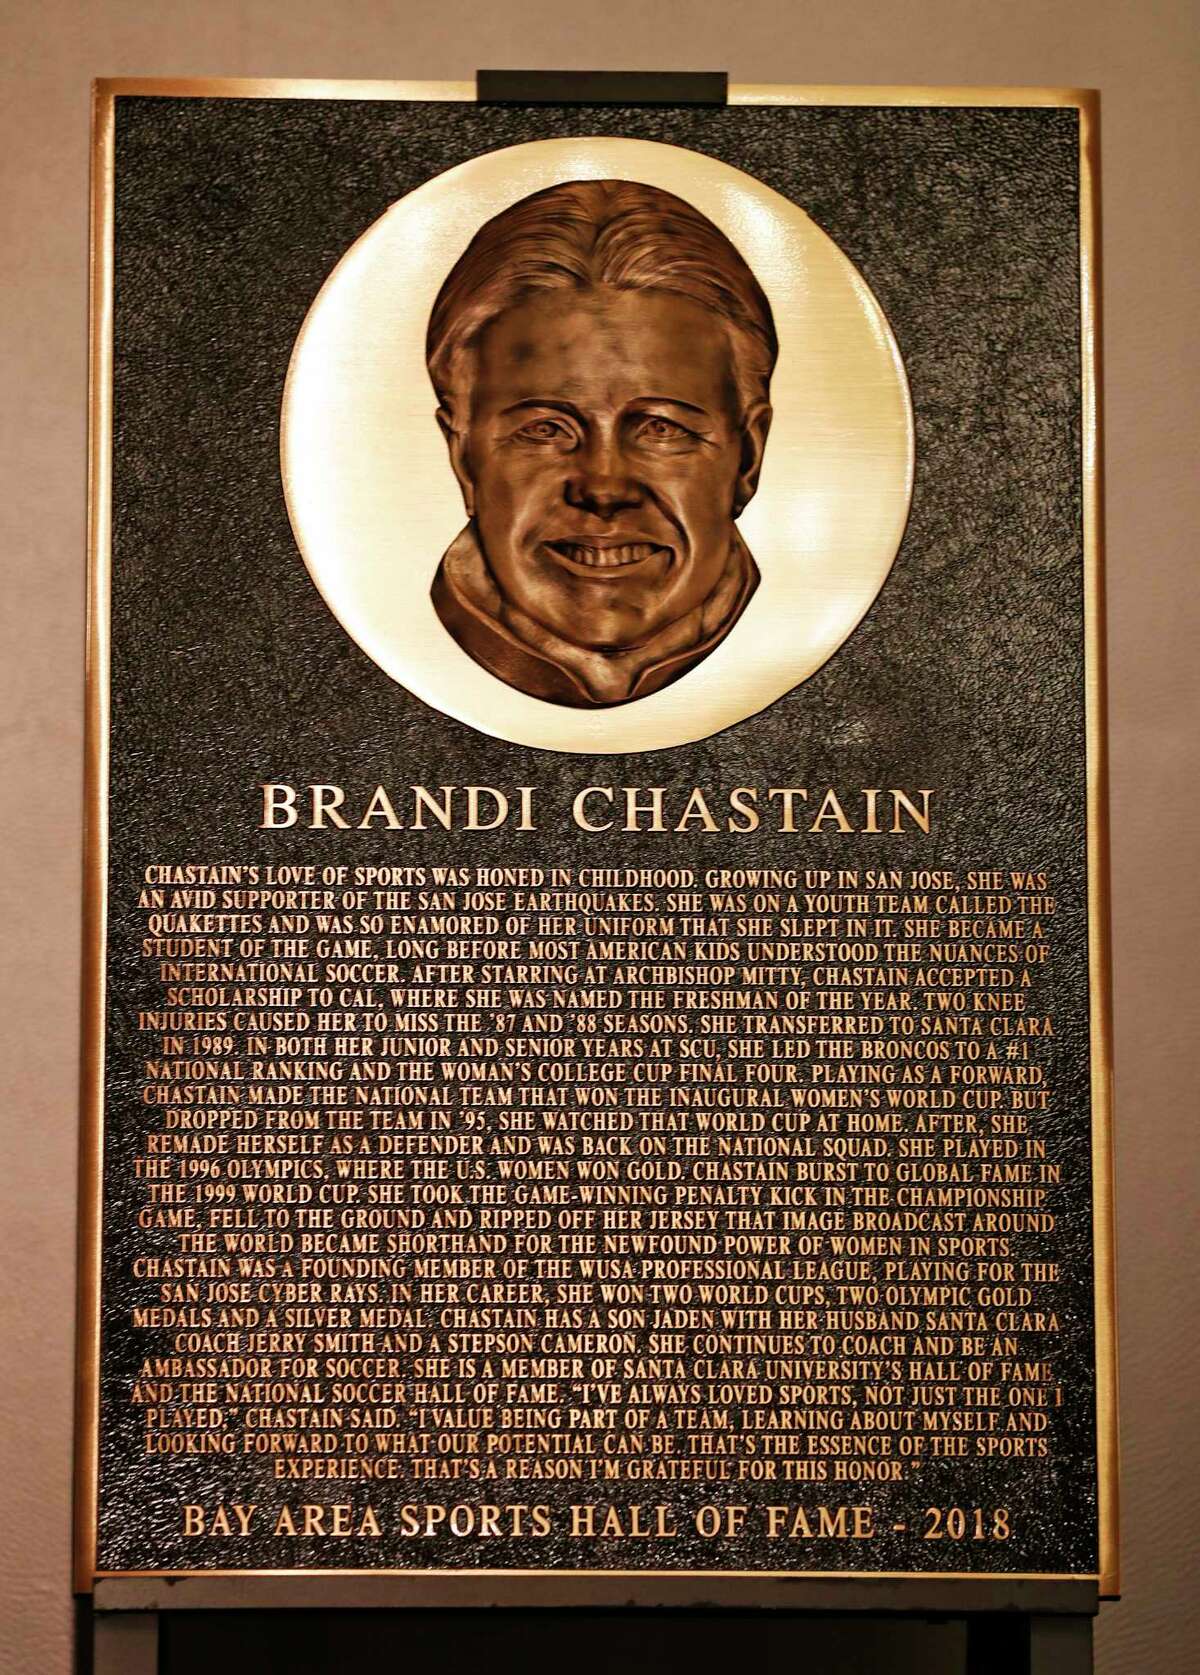 2018 Bay Area Sports Hall of Hame inductee Brandi Chastain's plaque during press conference at Westin St. Francis in San Francisco, CA on Monday, May 21, 2018. Keep clicking to see all the ways the plaque was mocked on social media.